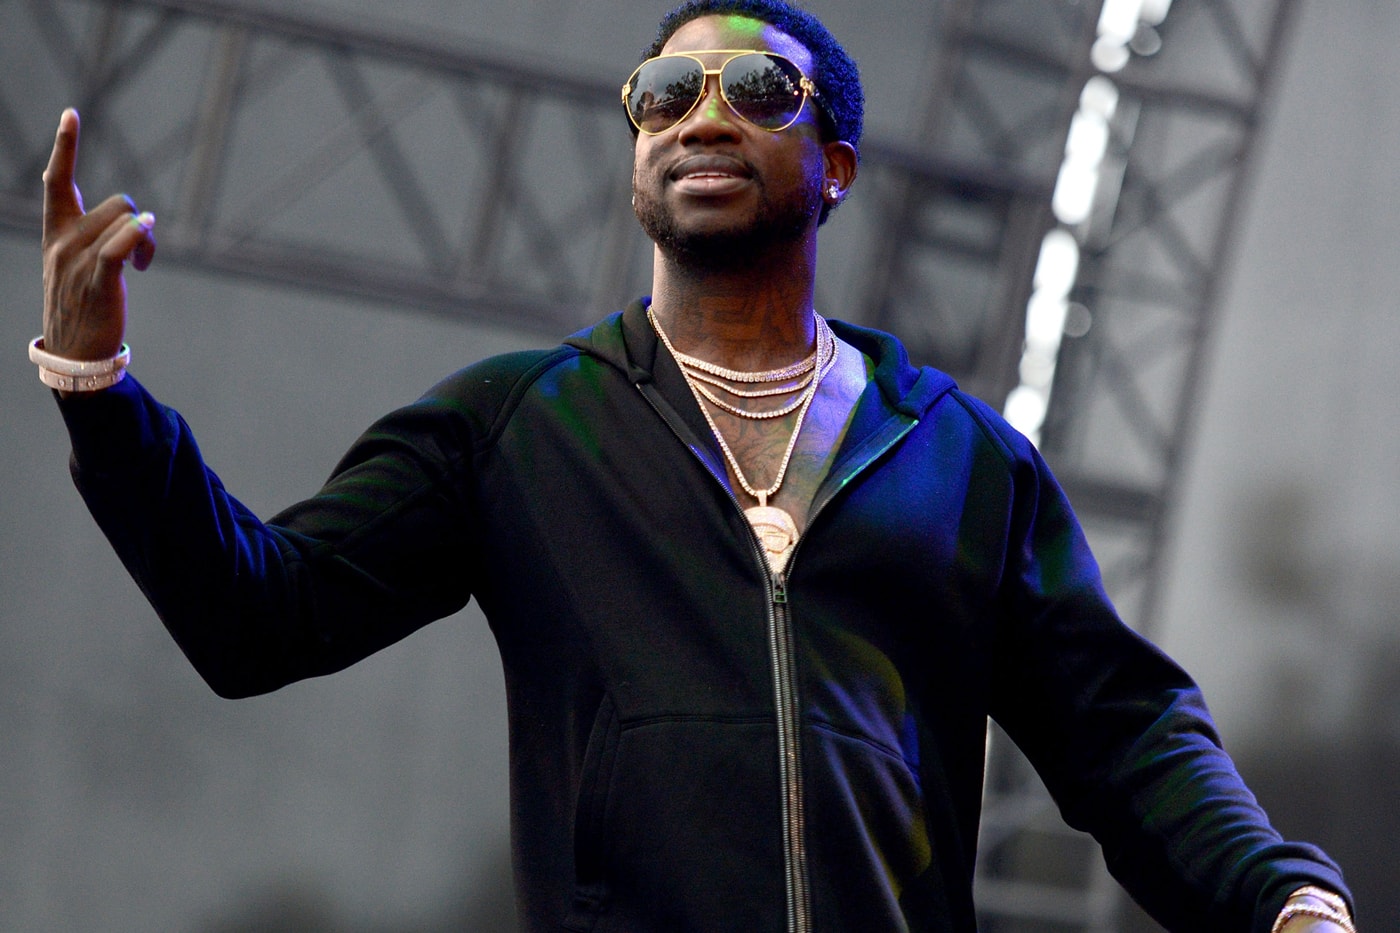 Gucci Mane Releaes Mixtape "Every Other Day" 2018